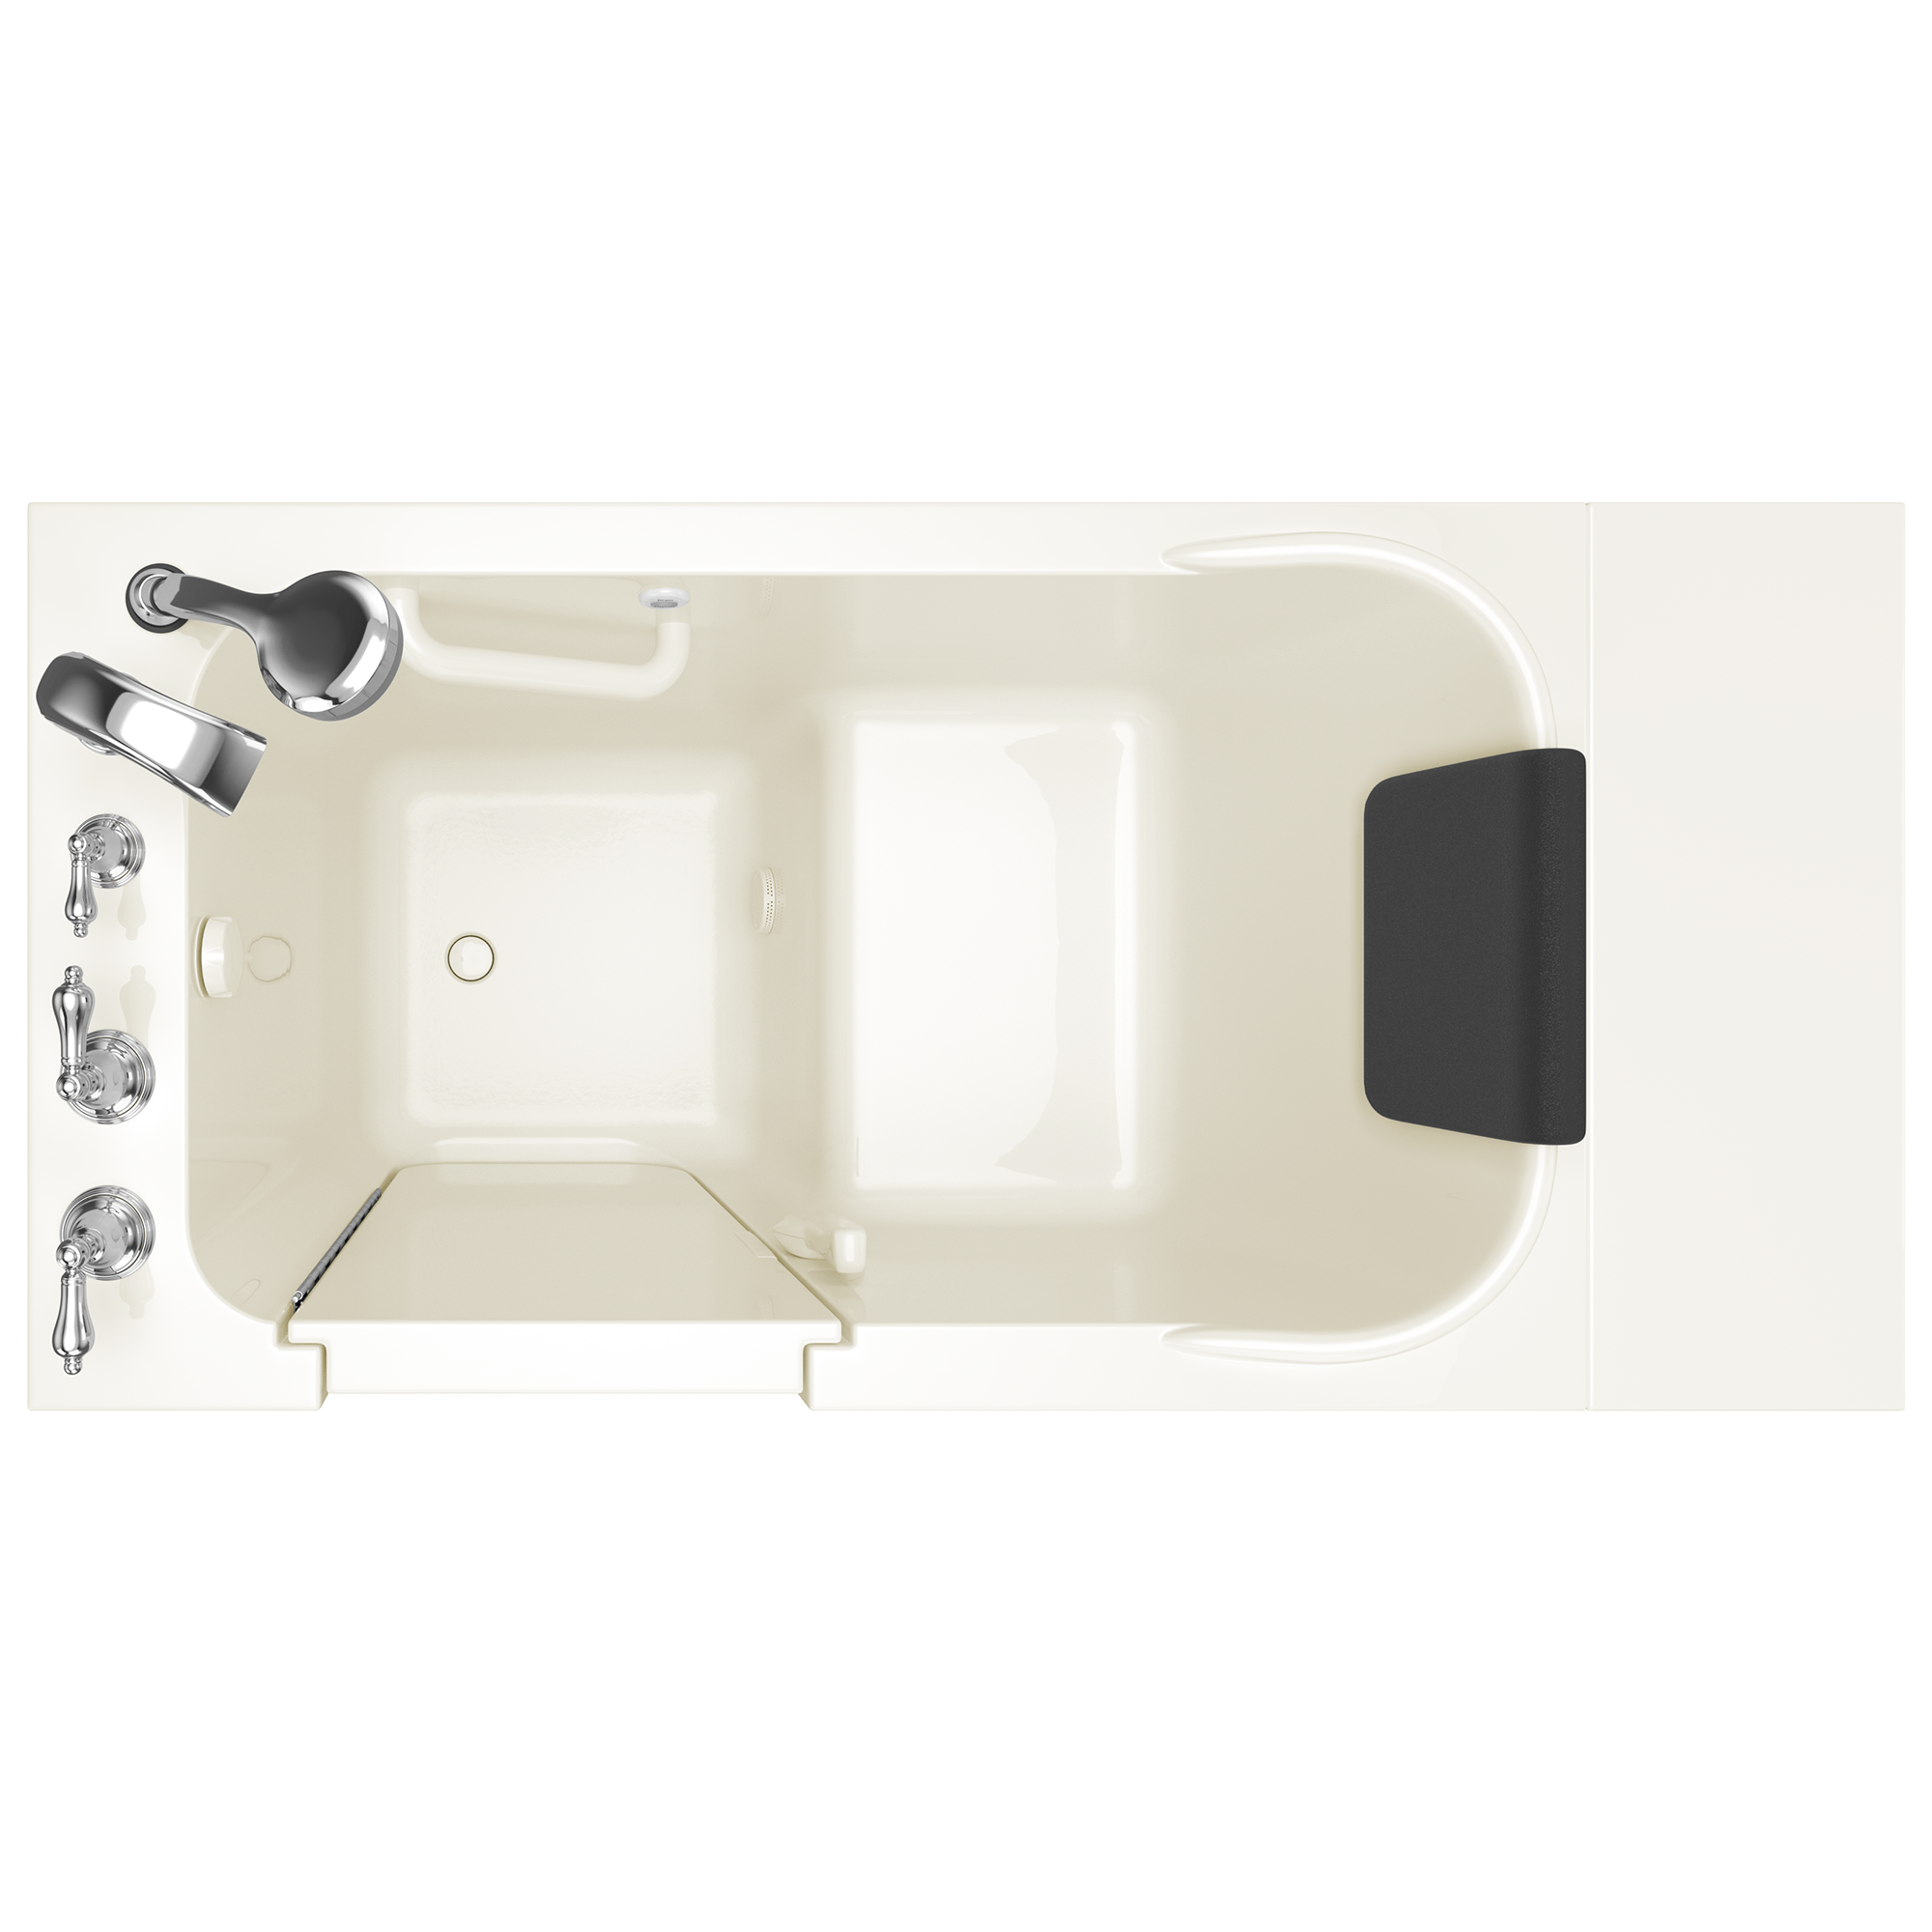 Gelcoat Premium Series 28 x 48 Inch Walk in Tub With Soaker System   Left Hand Drain With Faucet WIB LINEN